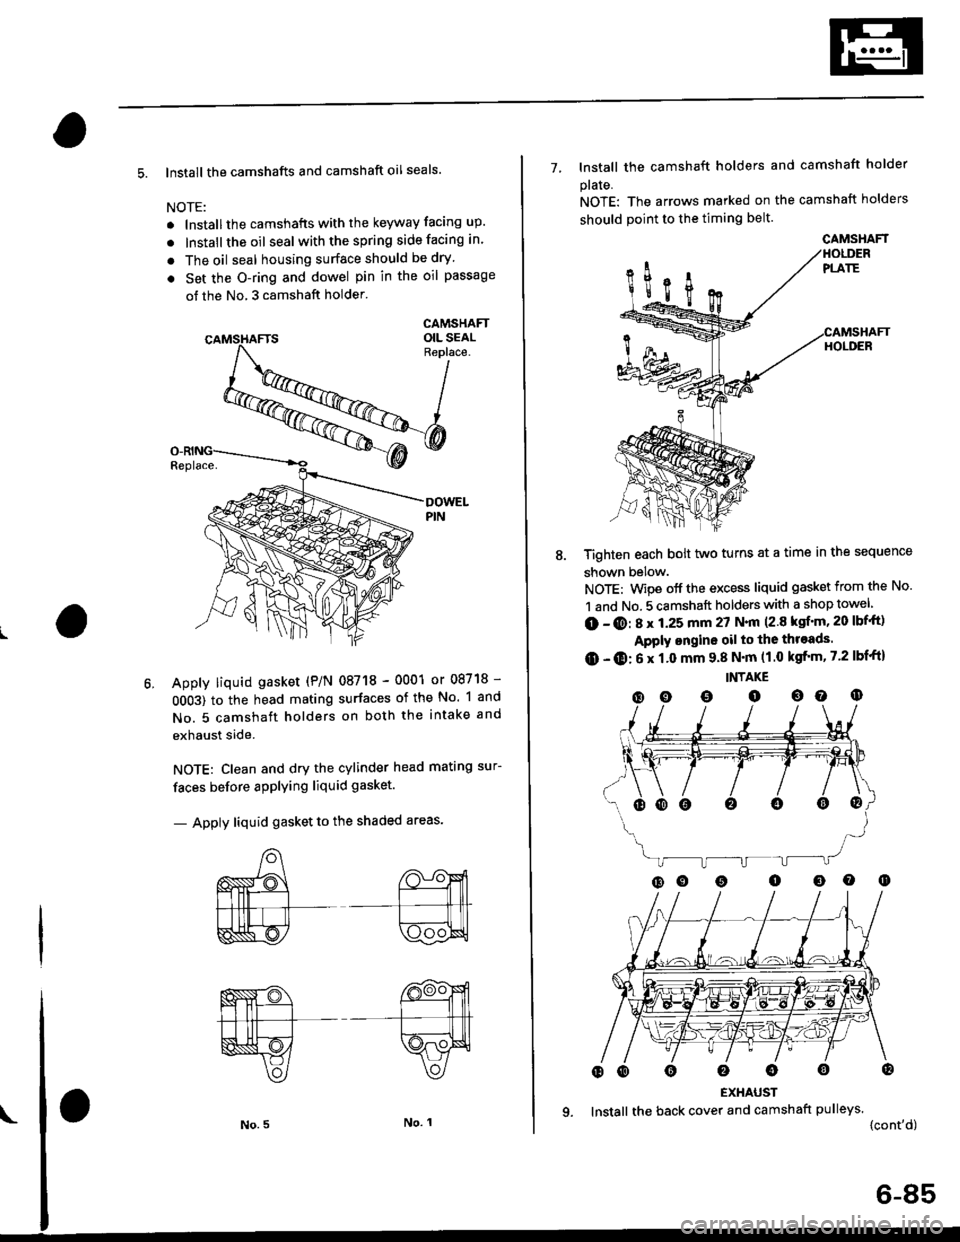 HONDA CIVIC 1996 6.G Workshop Manual 5. lnstall the camshafts and camshaft oil seals.
NOTE:
. lnstallthe camshafts with the keyway facing up.
. lnstall the oil seal withthespring side facing in.
. The oil seal housing surface should be d